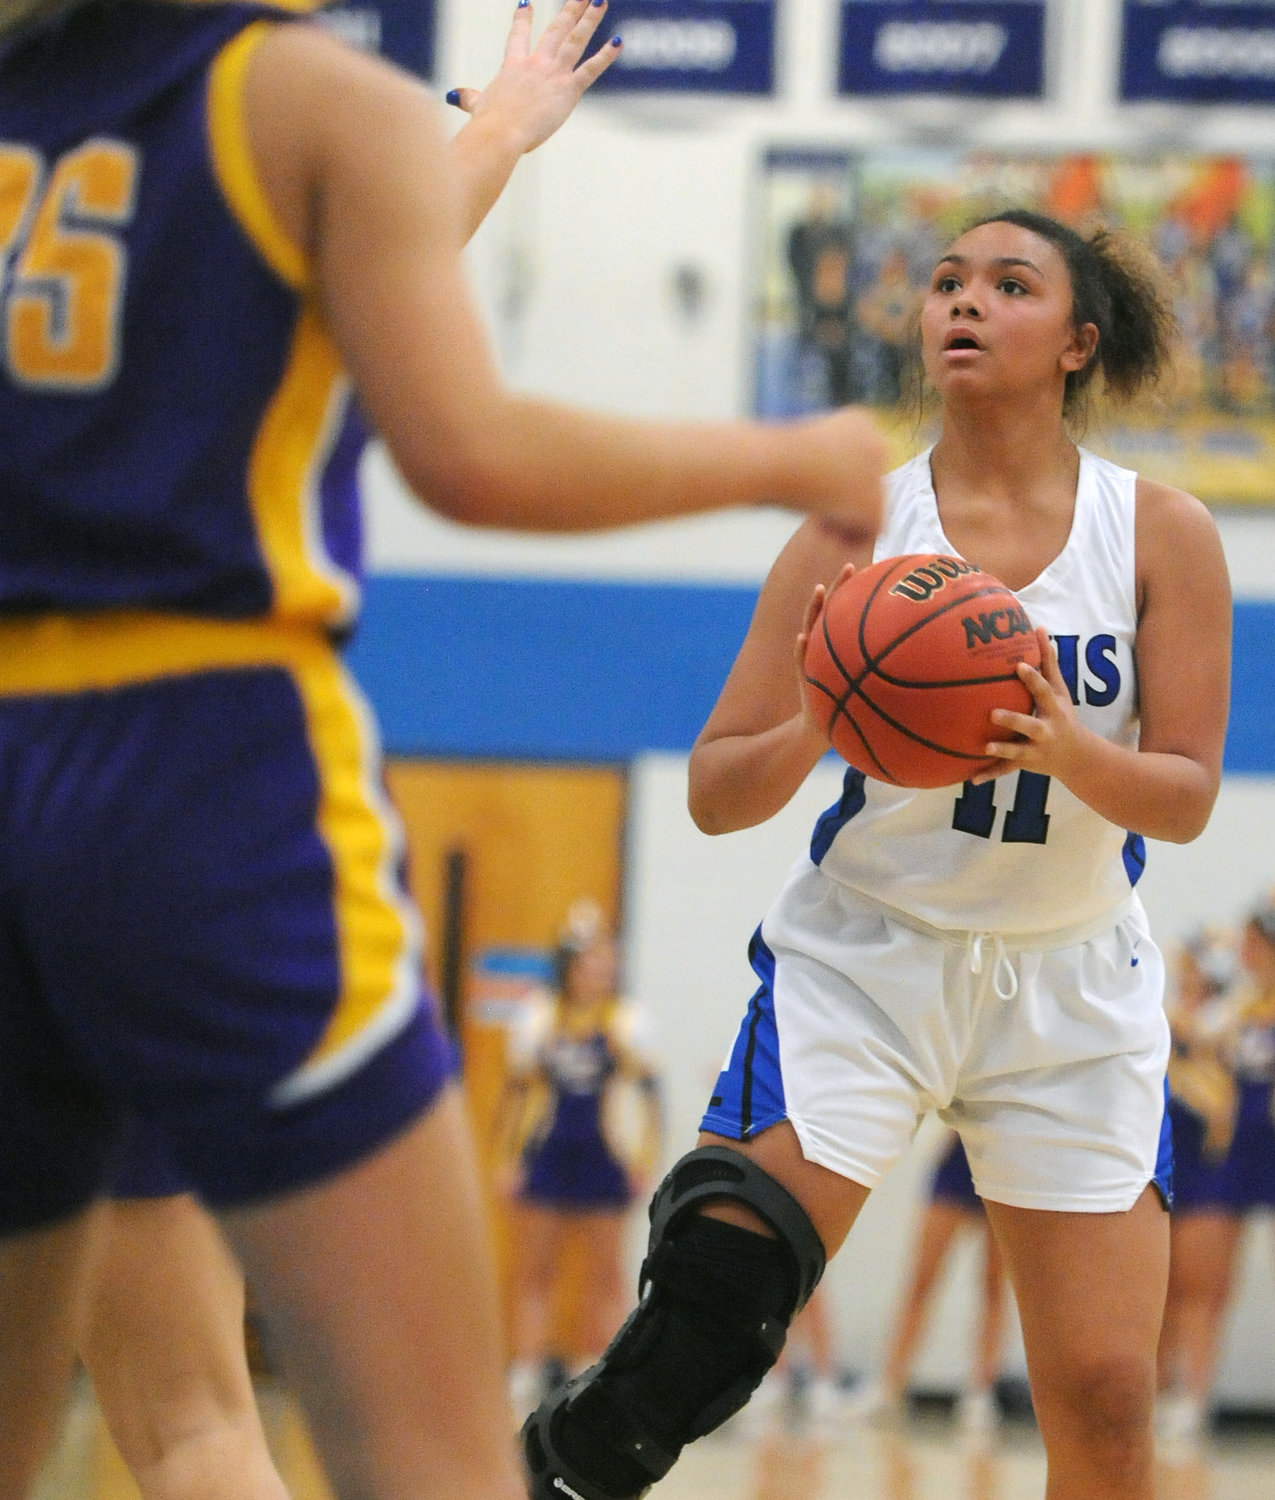 Demiyah Blackman squares up and fires off a 15-footer. She led the Tigerettes with 10 points on Tuesday.